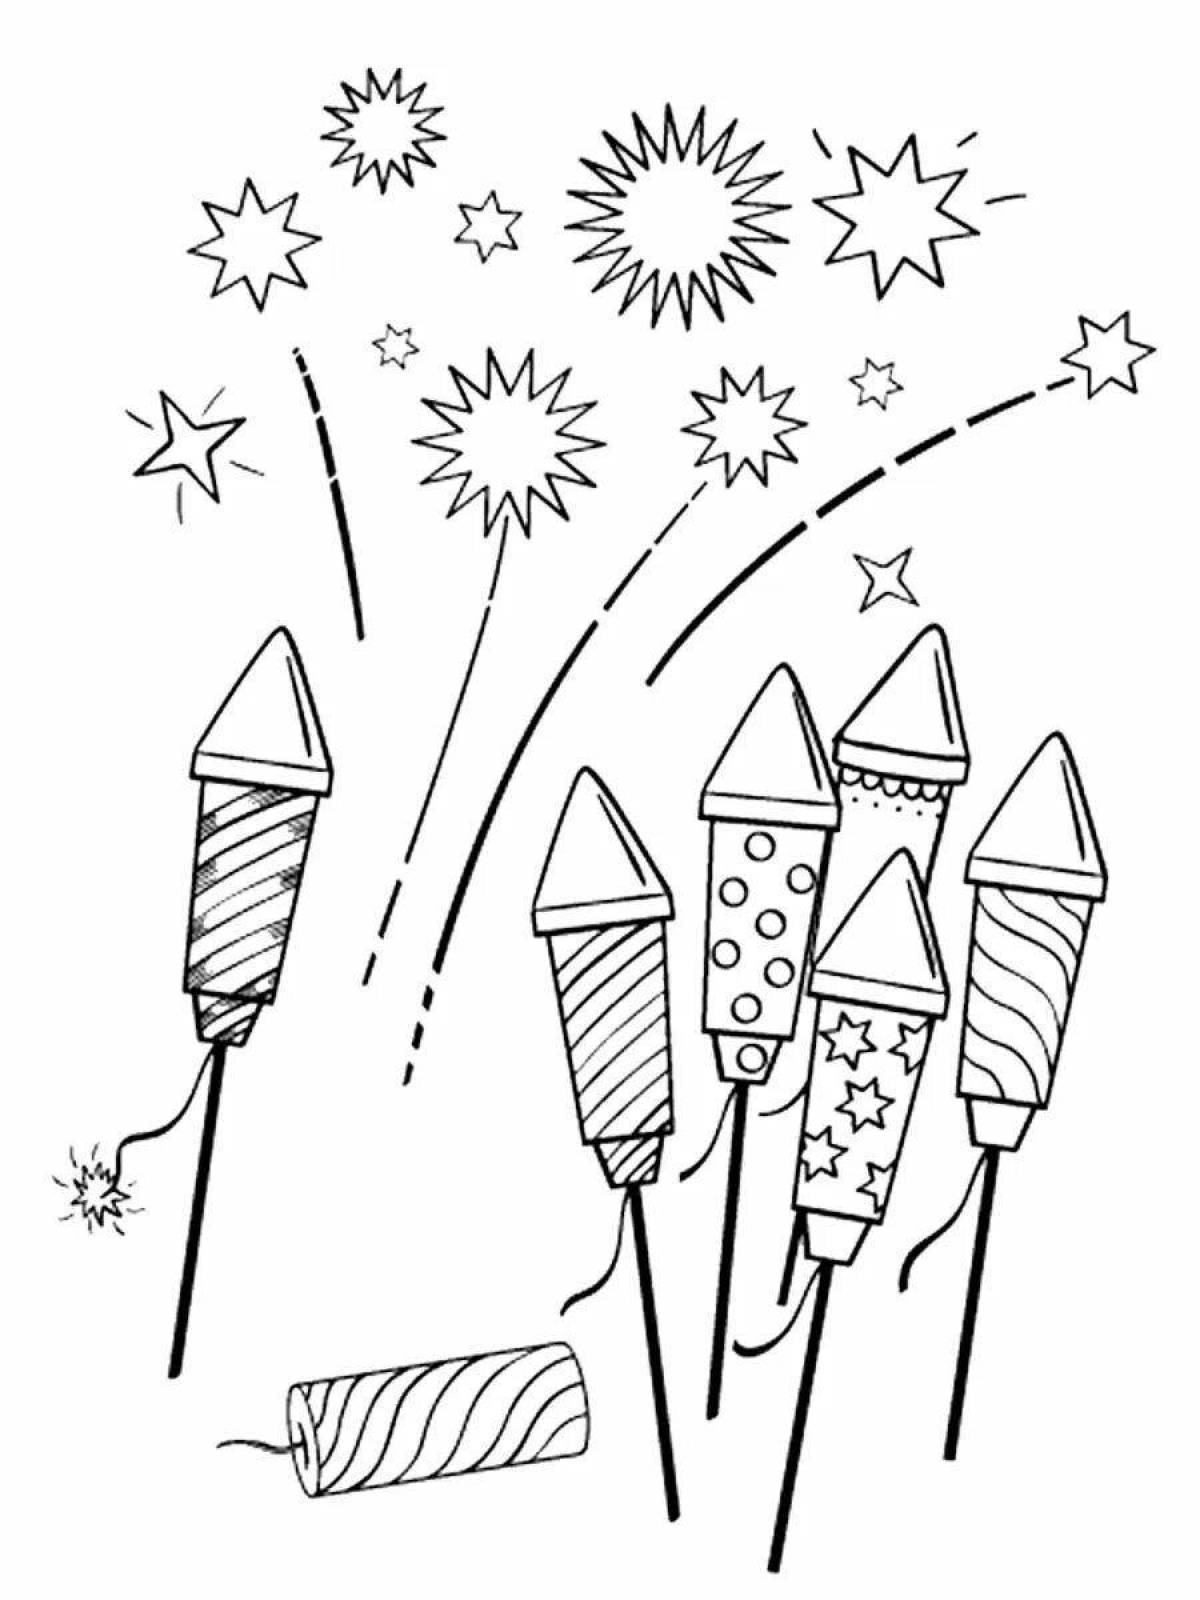 Coloring book flaming fireworks